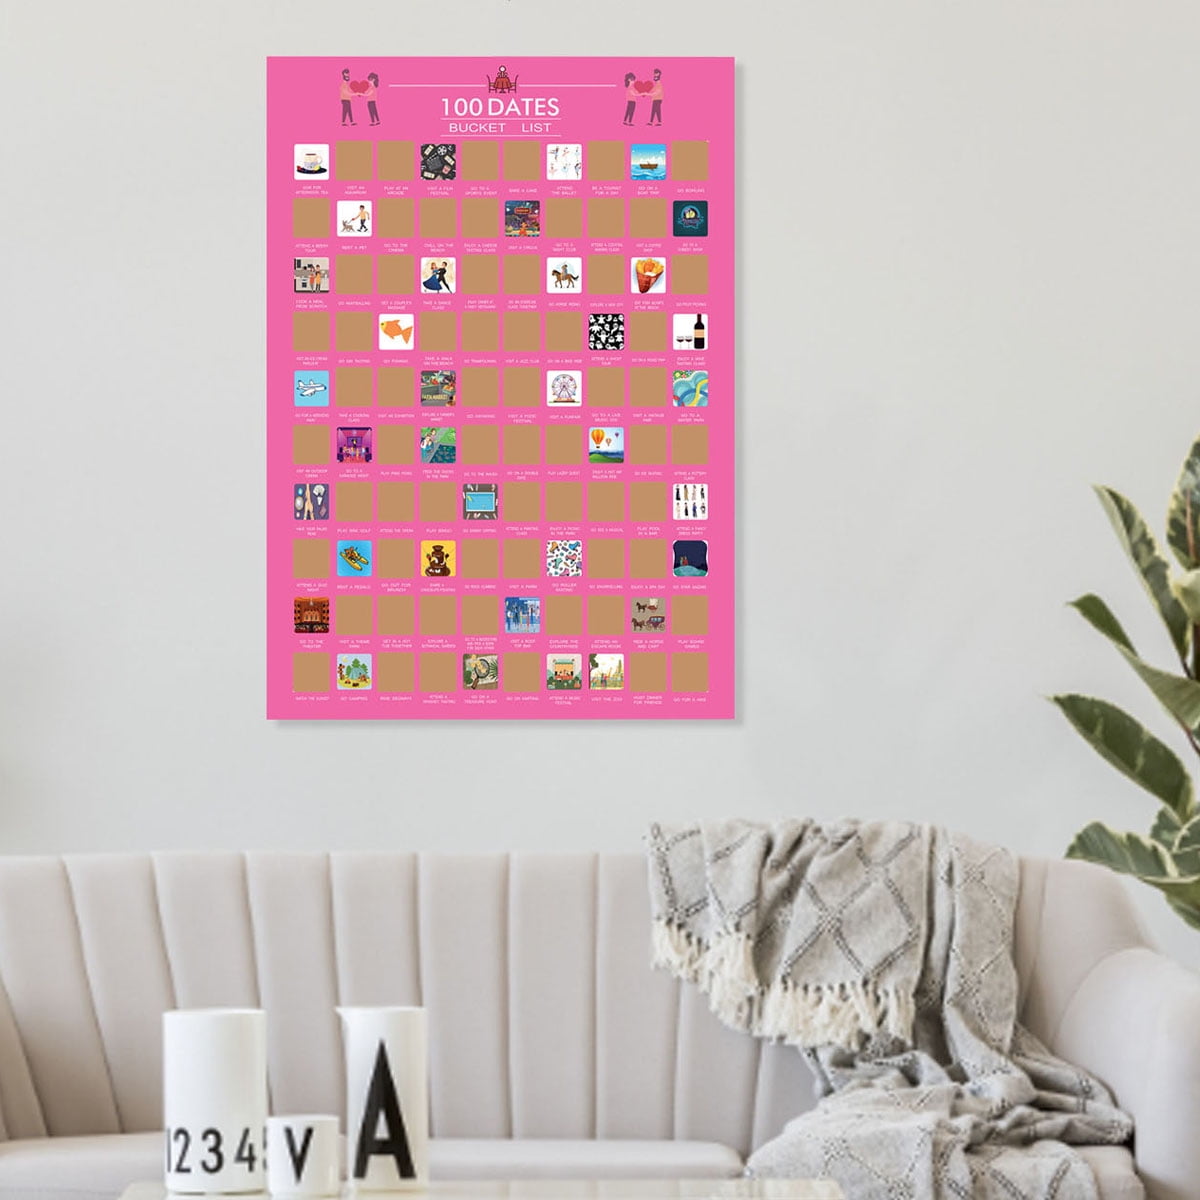 WISHMEAD 100 Dates Scratch Off Poster - Bucket List - Couples Games Date  Night Ideas - Wedding Gifts for Couple Games for Couples Gifts - Valentines